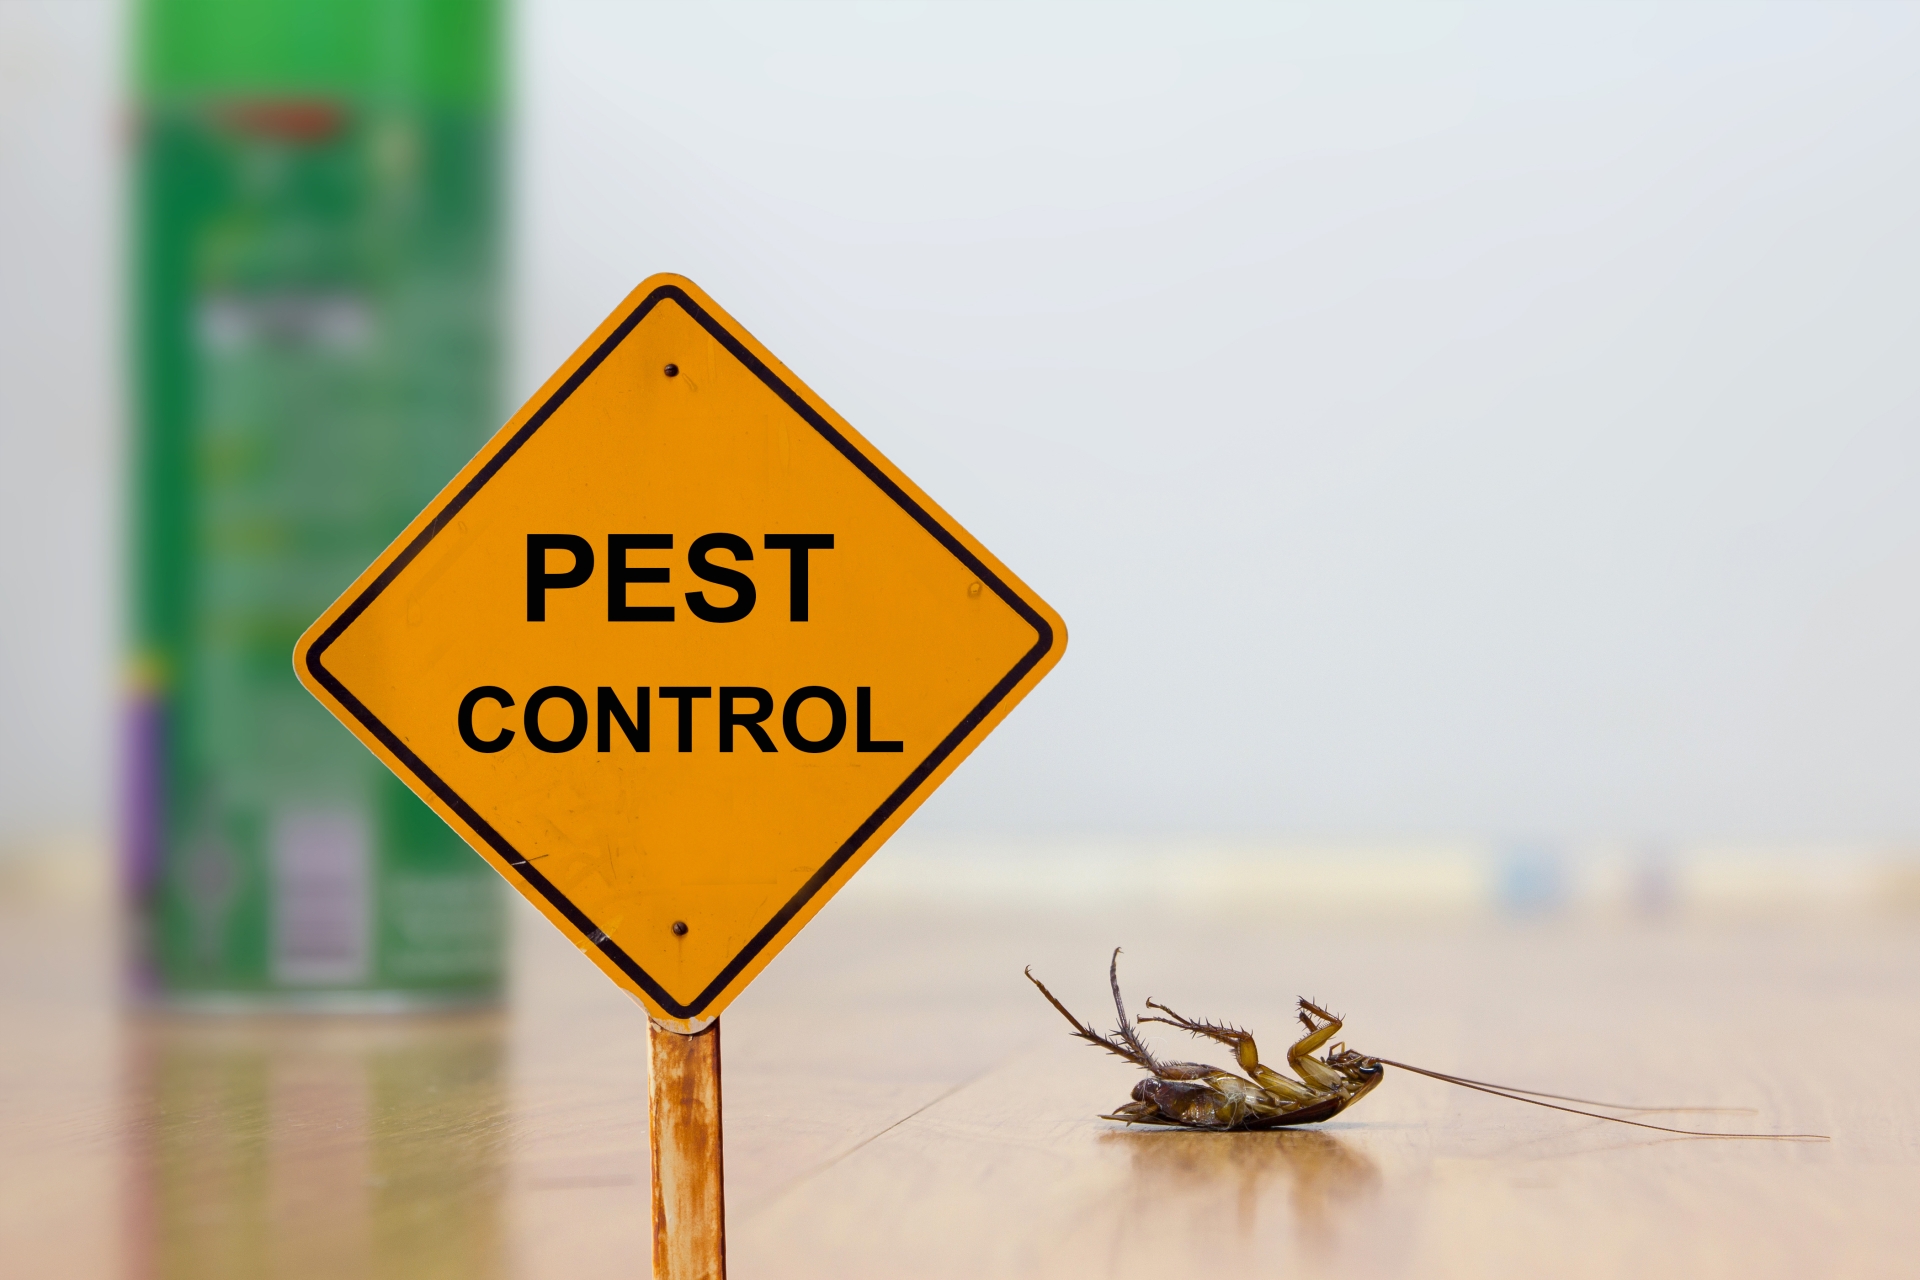 24 Hour Pest Control, Pest Control in Highbury, N5. Call Now 020 8166 9746